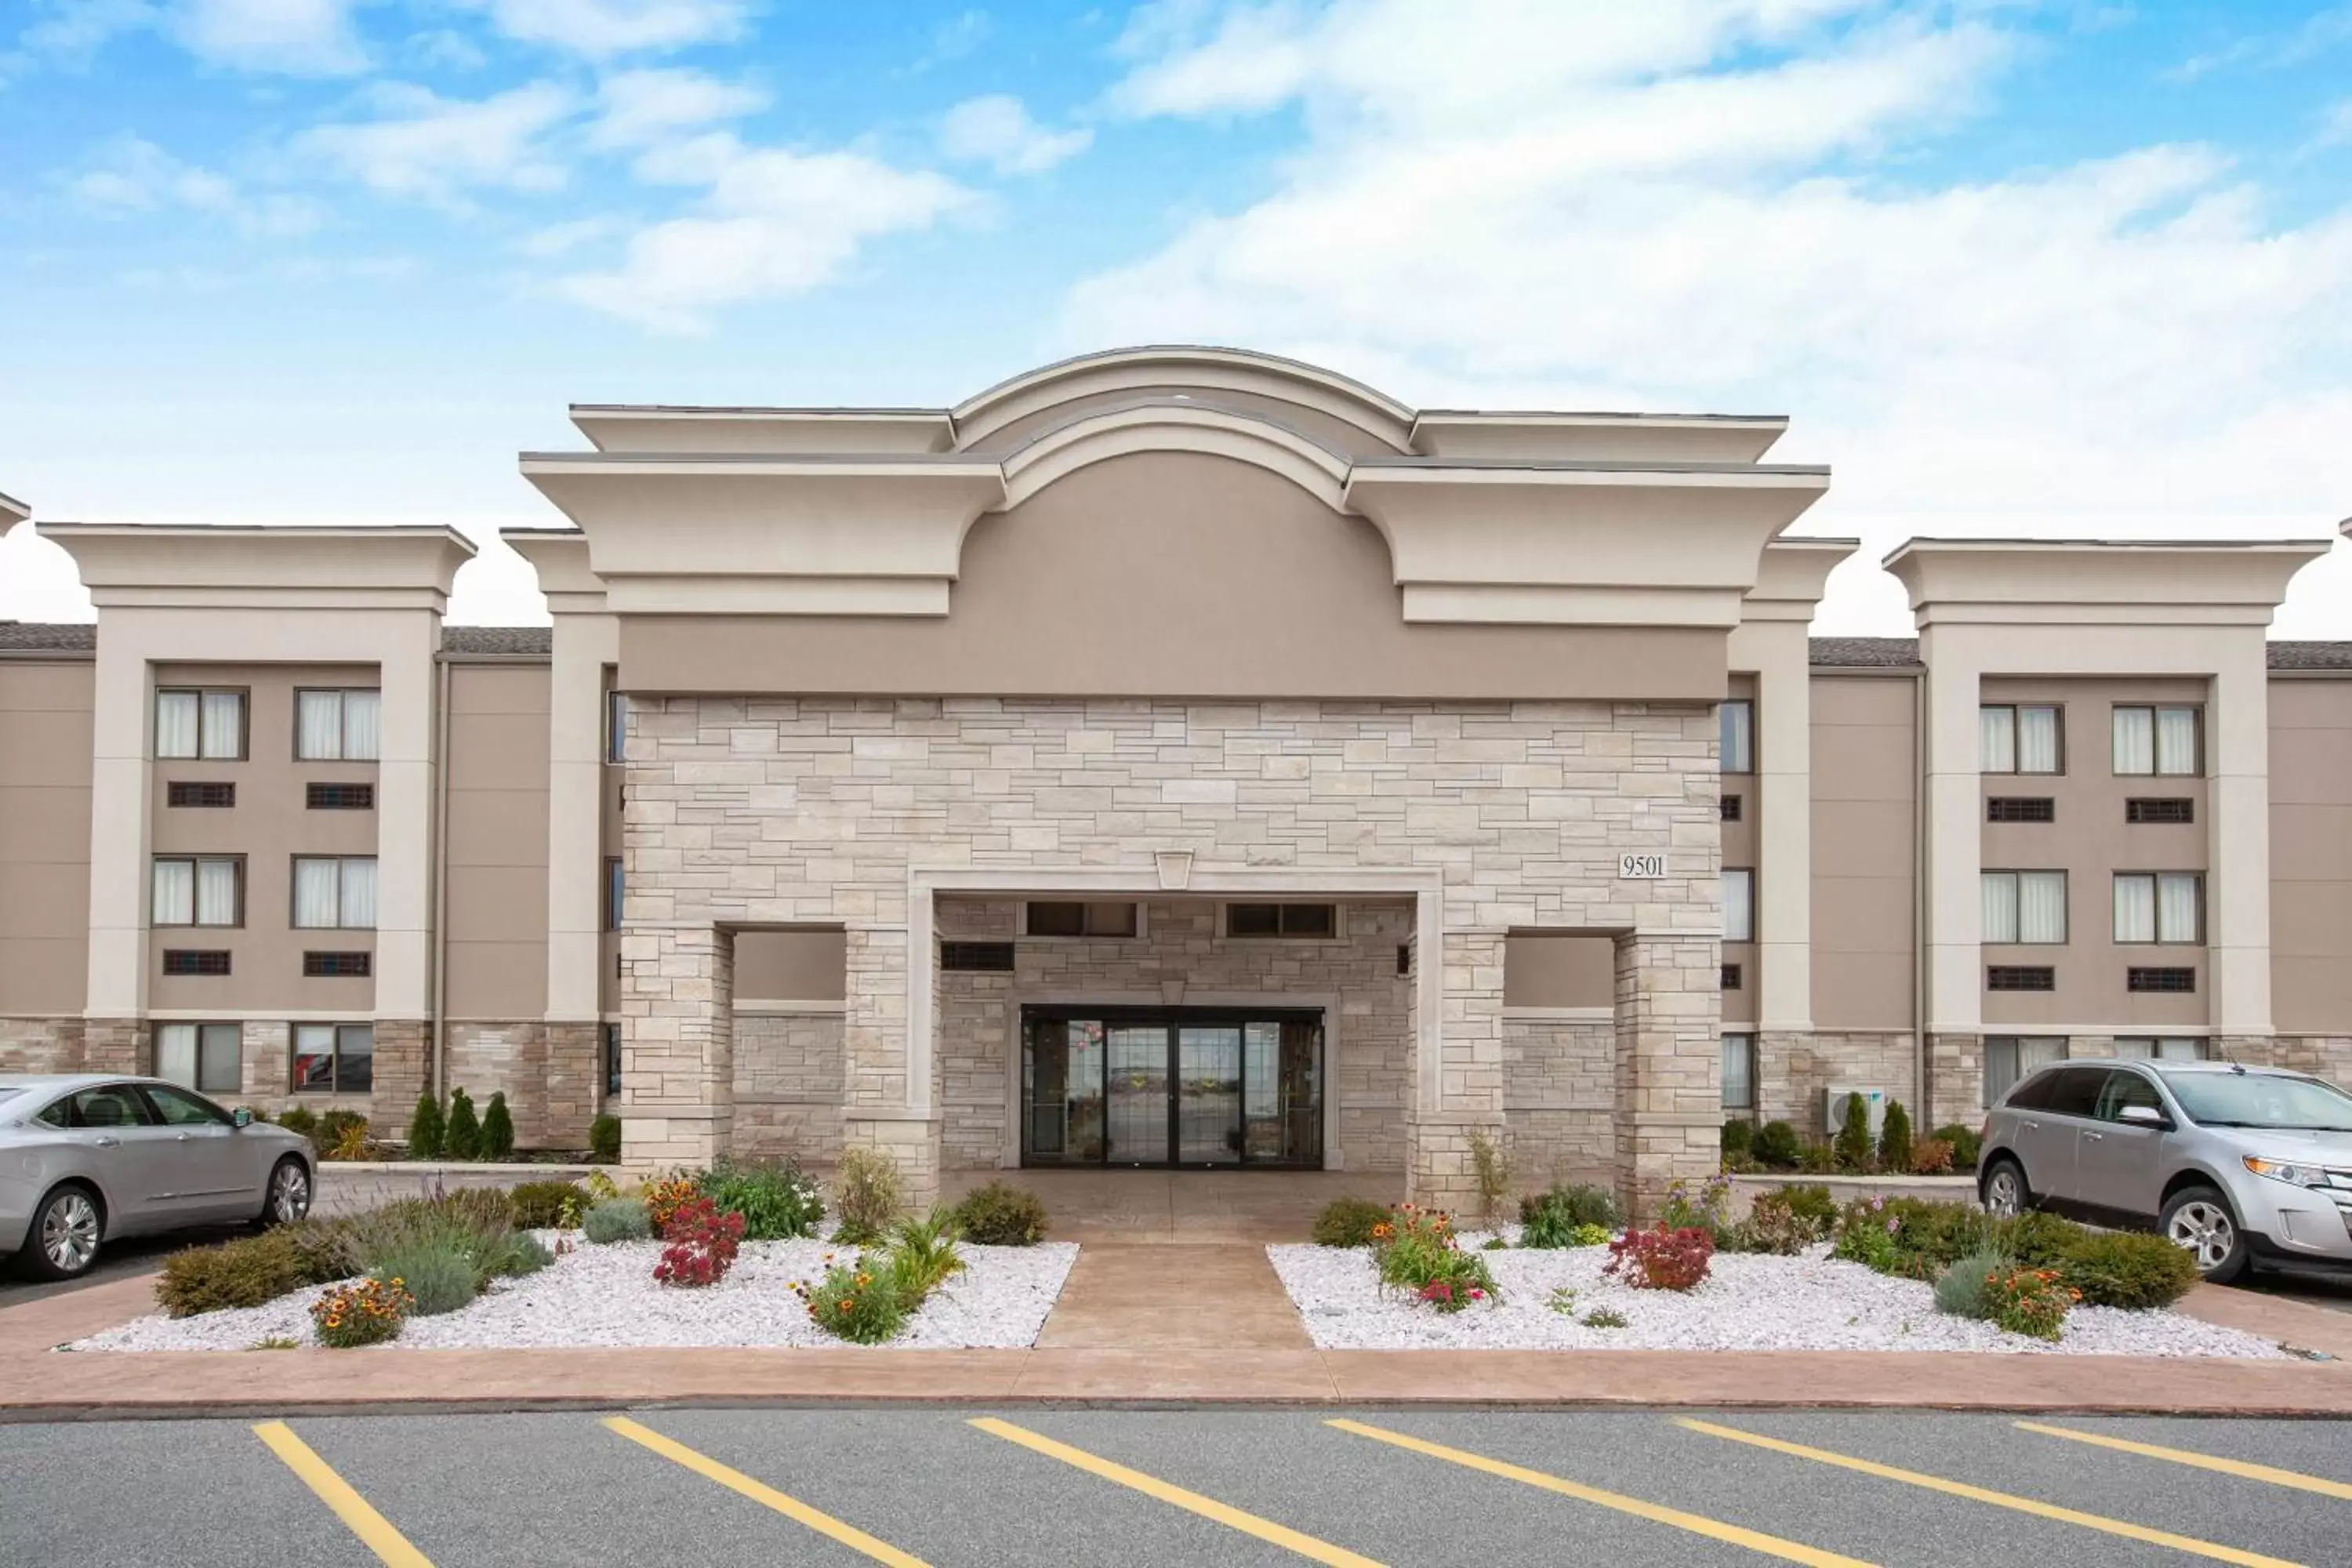 Property Building in Wingate by Wyndham Detroit Metro Airport